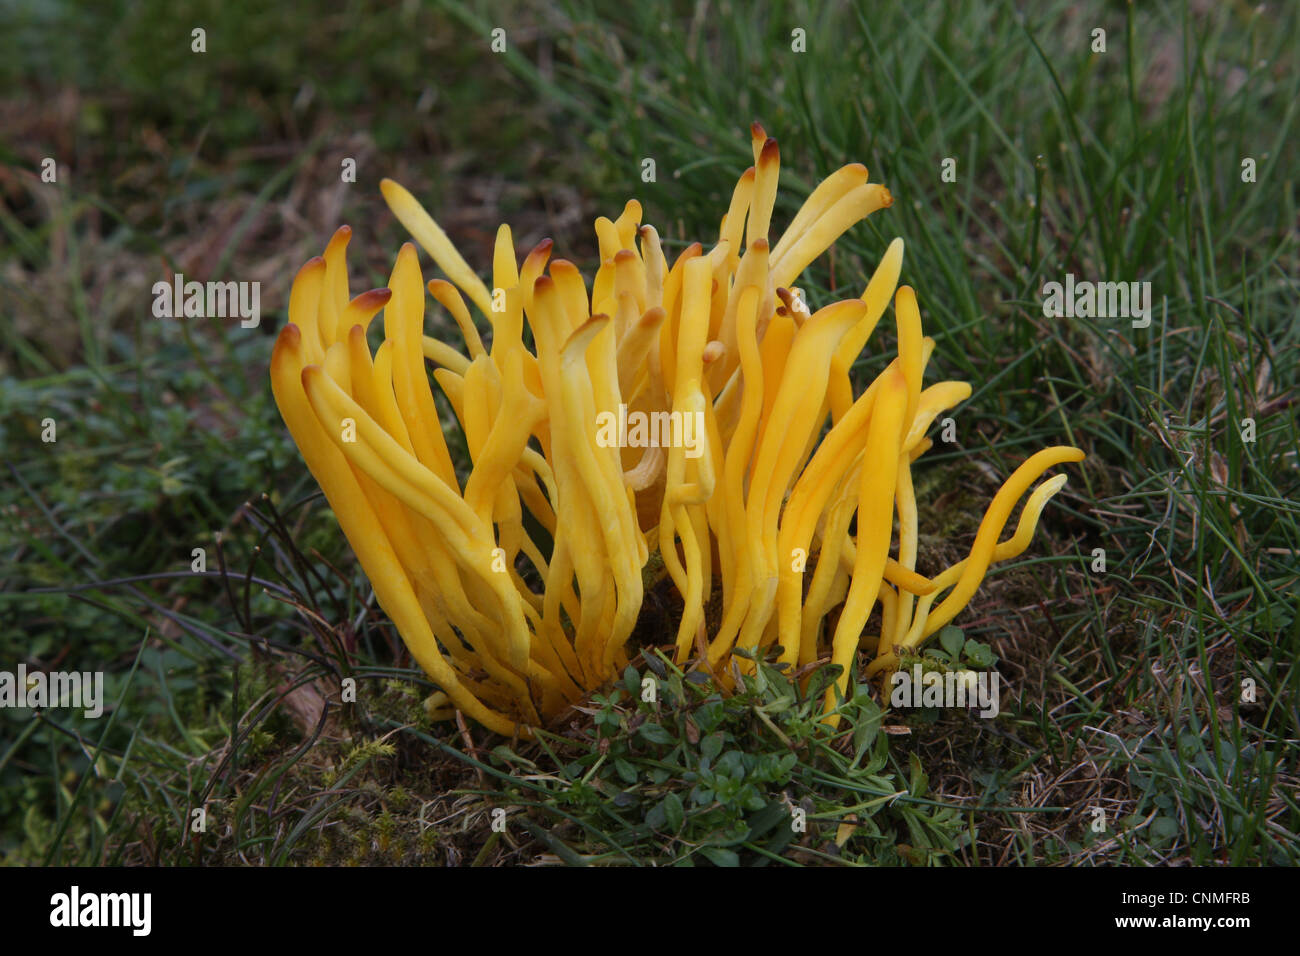 Golden Spindles (Clavulinopsis fusiformis) fruiting body, growing amongst grass in woodland, Leicestershire, England, september Stock Photo